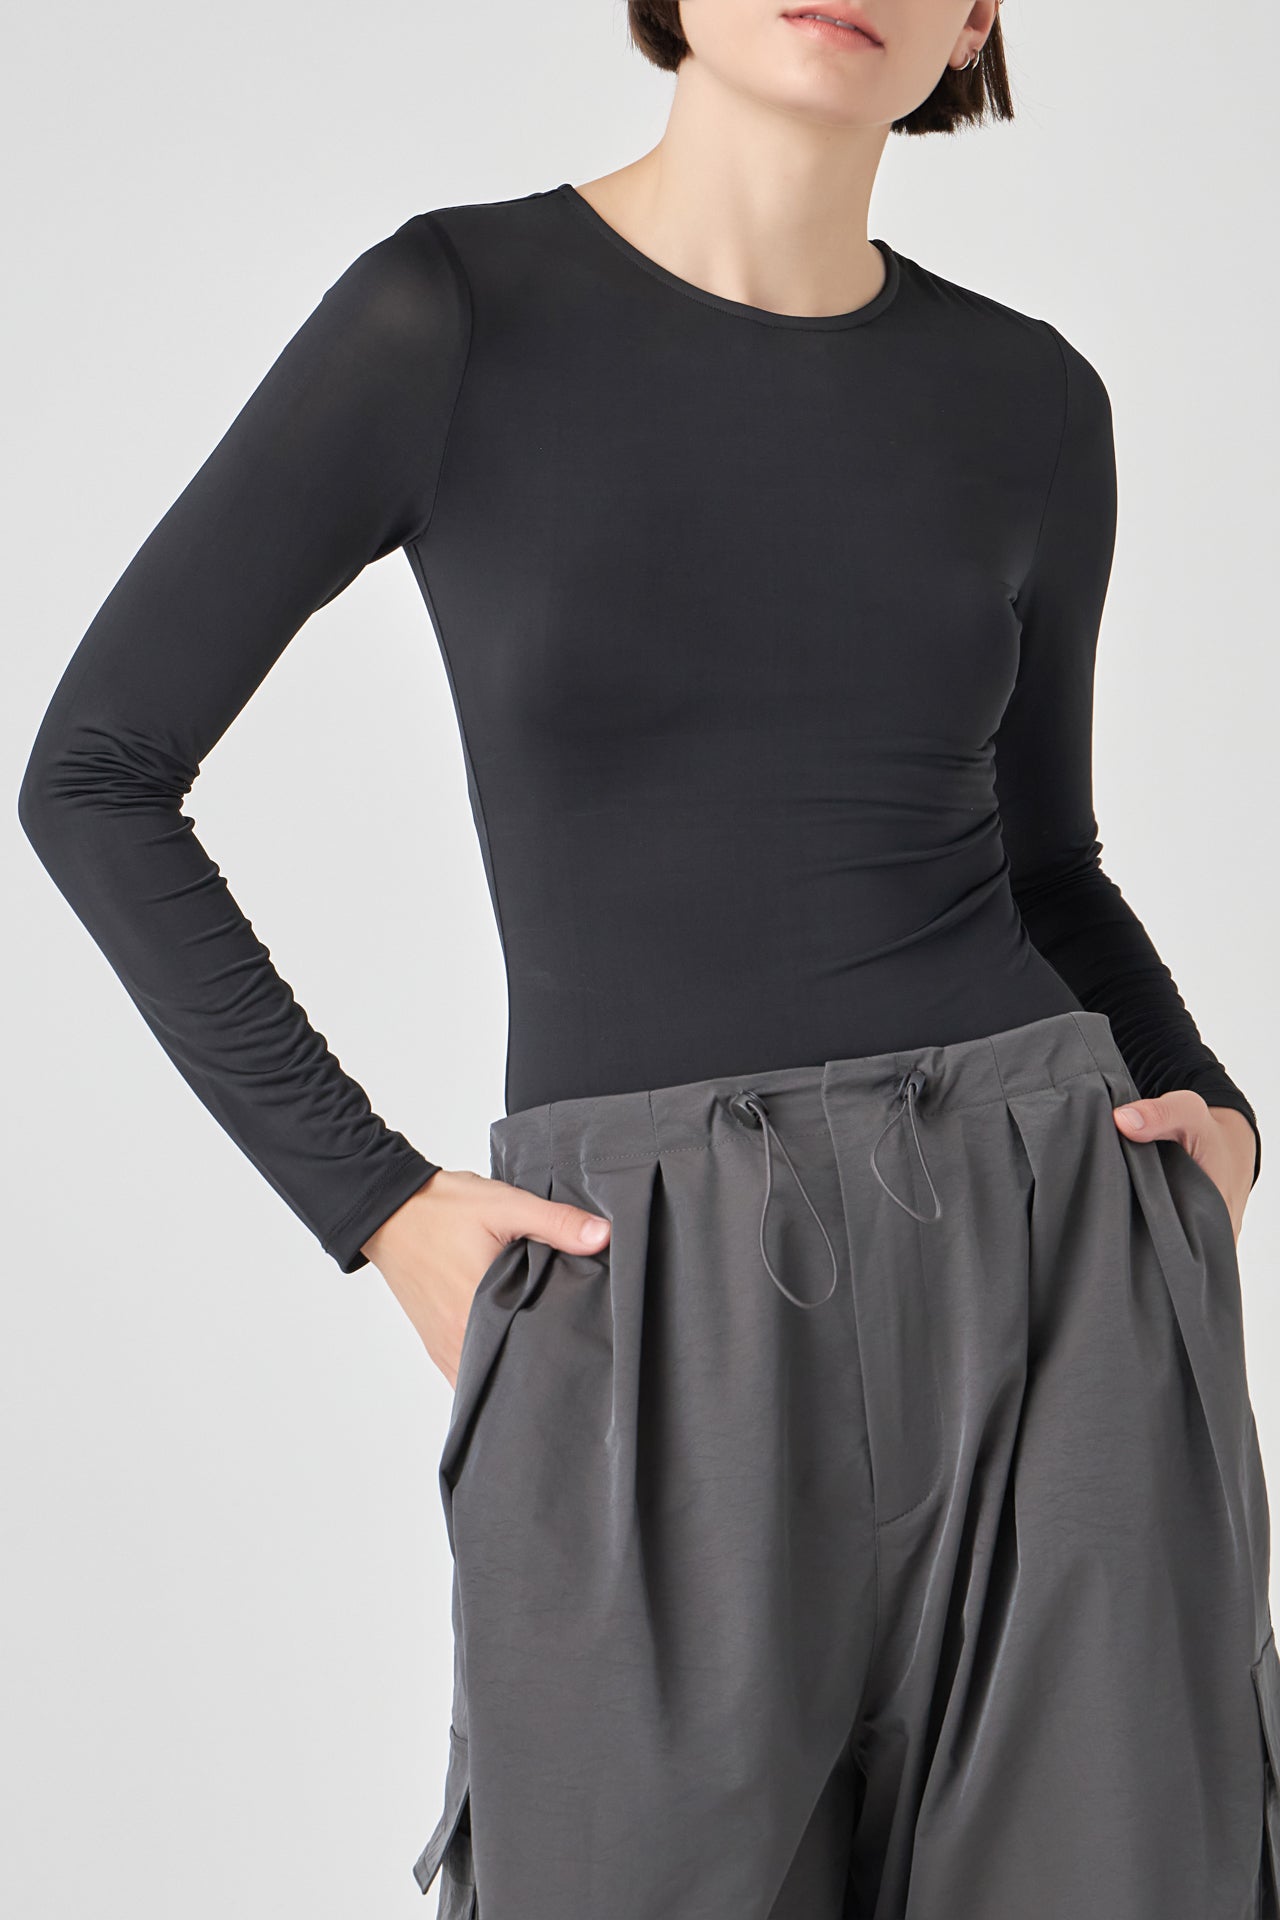 GREY LAB - Long Sleeve Soft Bodysuit - TOPS available at Objectrare